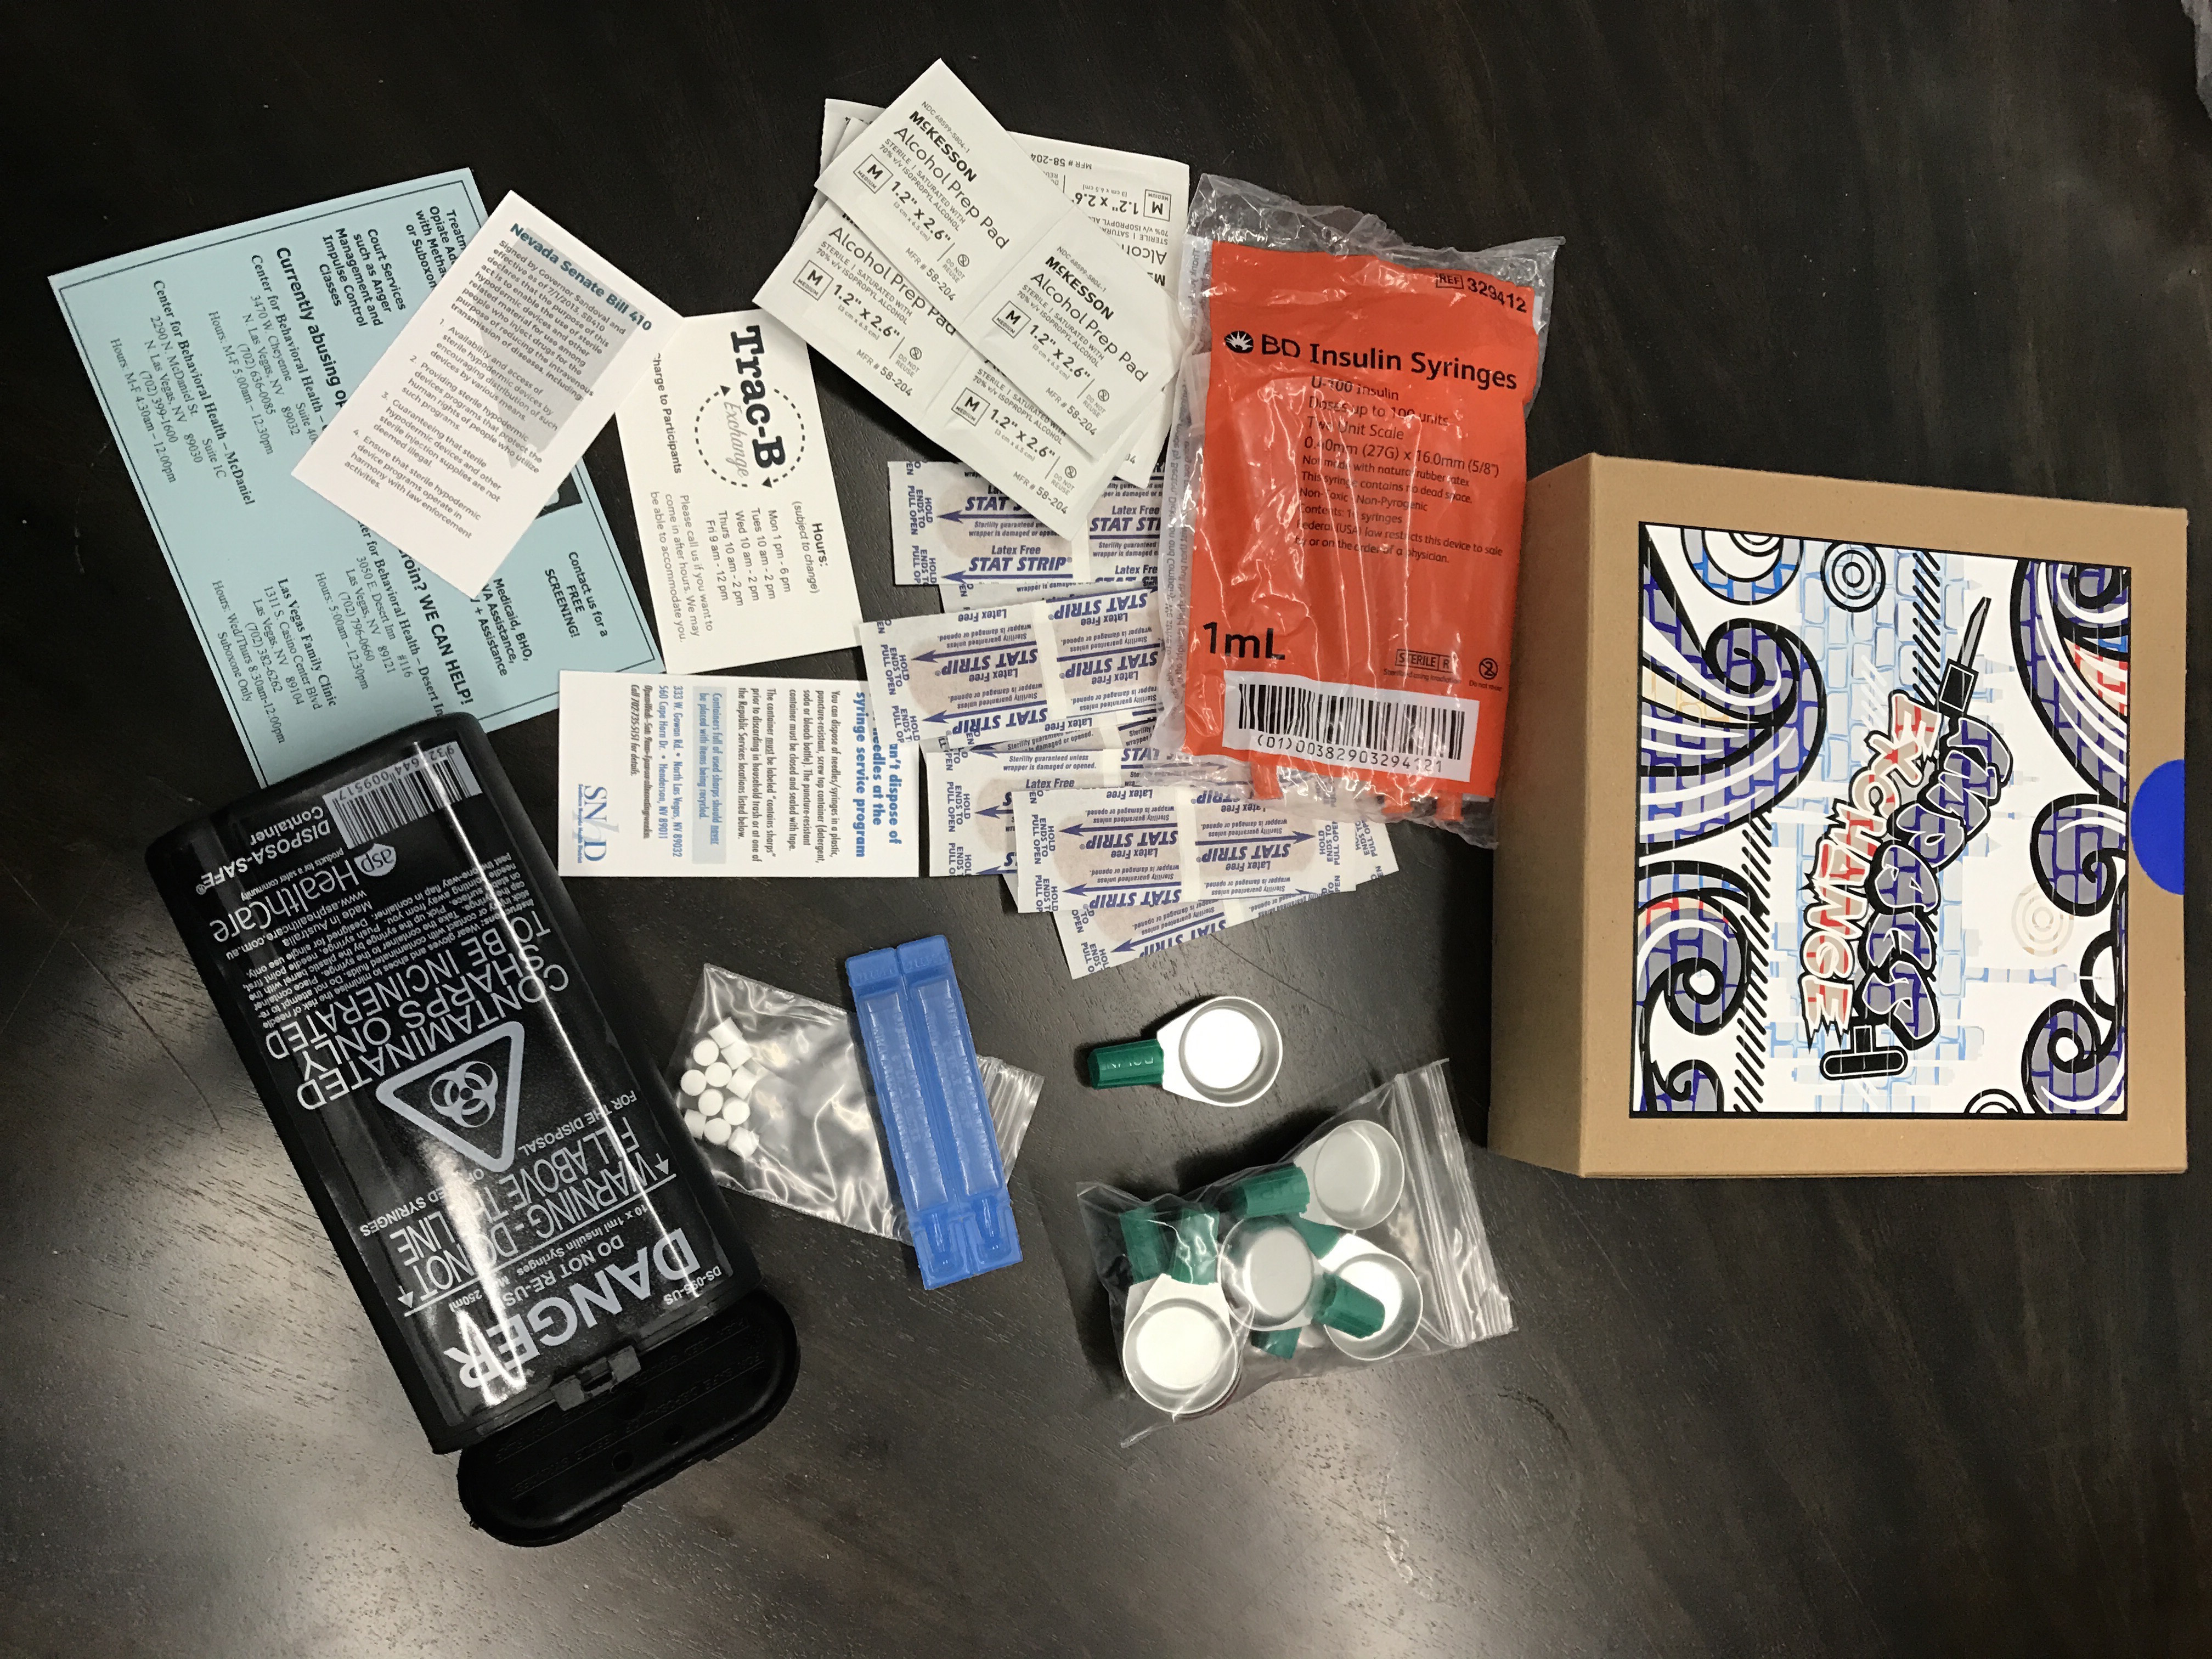 Vending machine packets contain syringes and IV drug tools